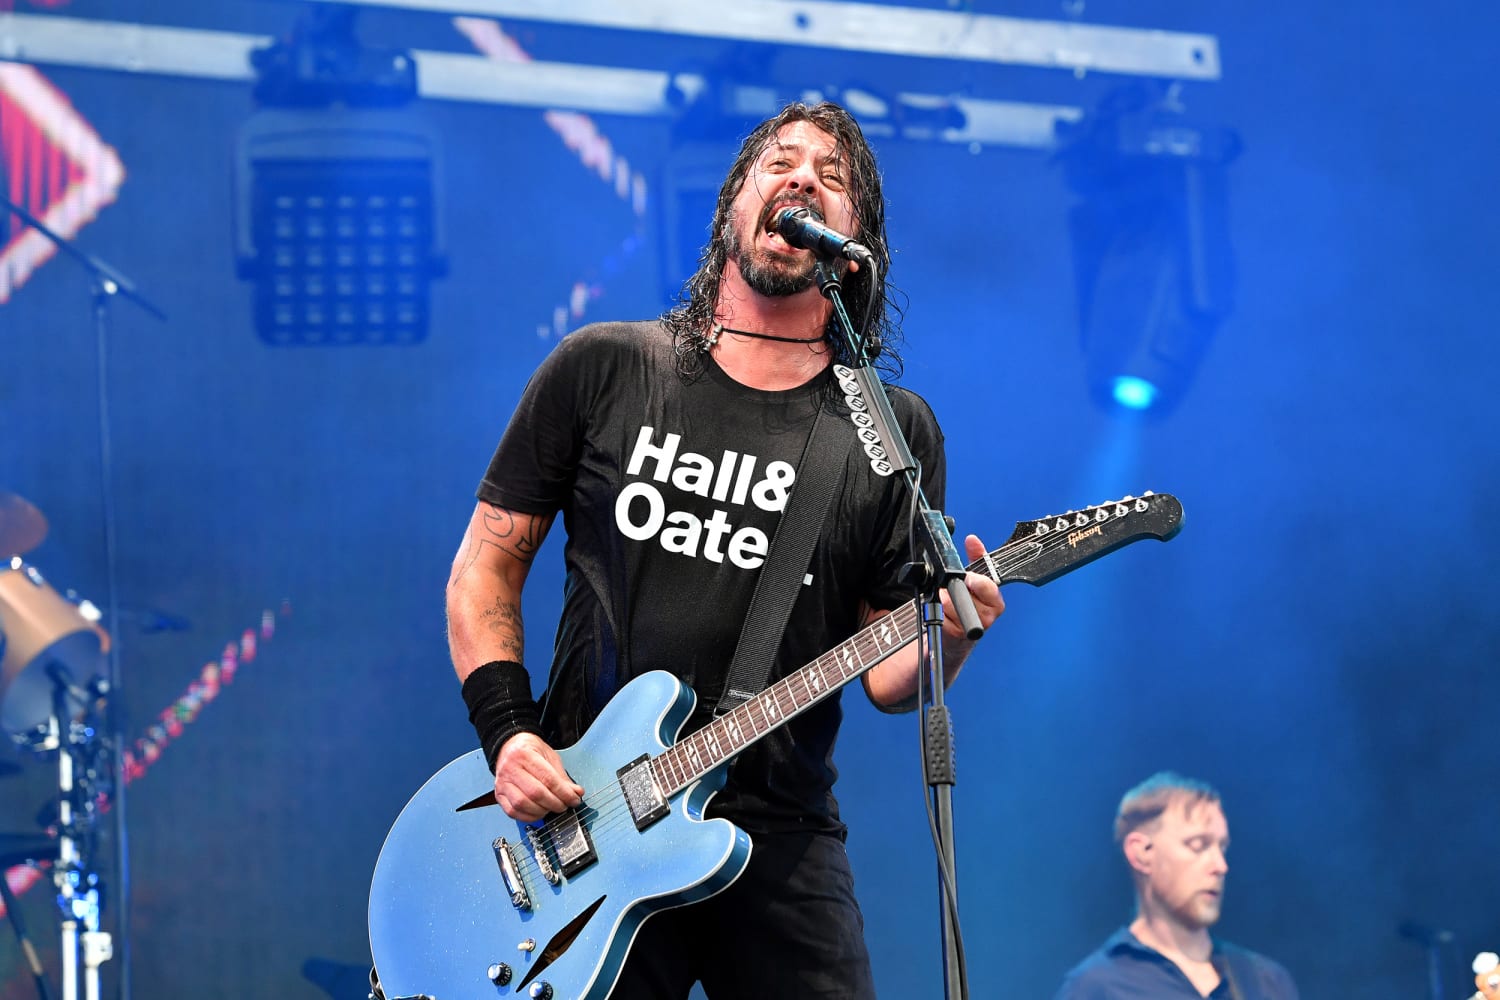 Foo Fighters Inducted Into Rock and Roll Hall of Fame